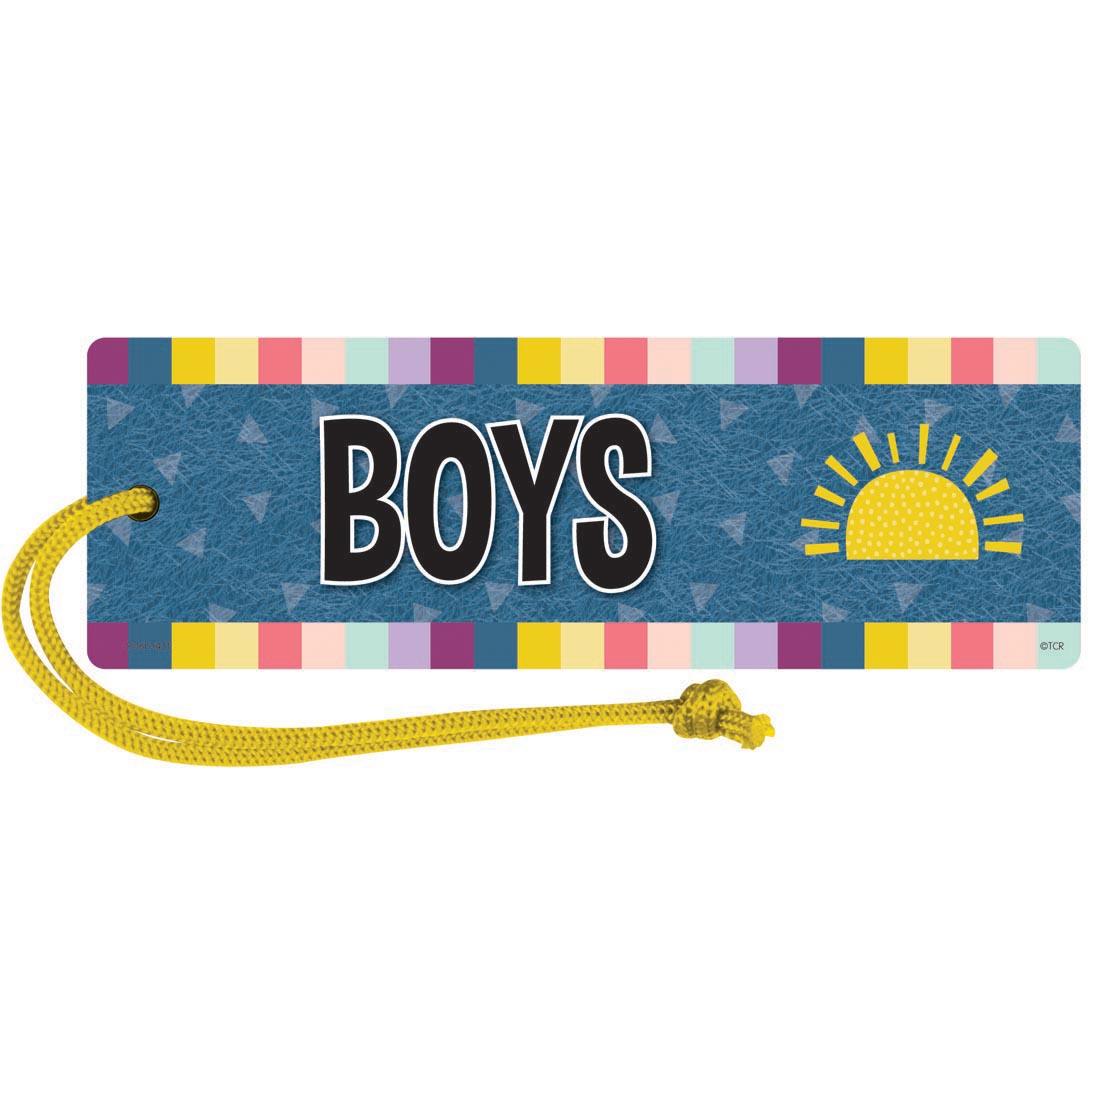 Magnetic Boys Pass from the Oh Happy Day collection by Teacher Created Resources